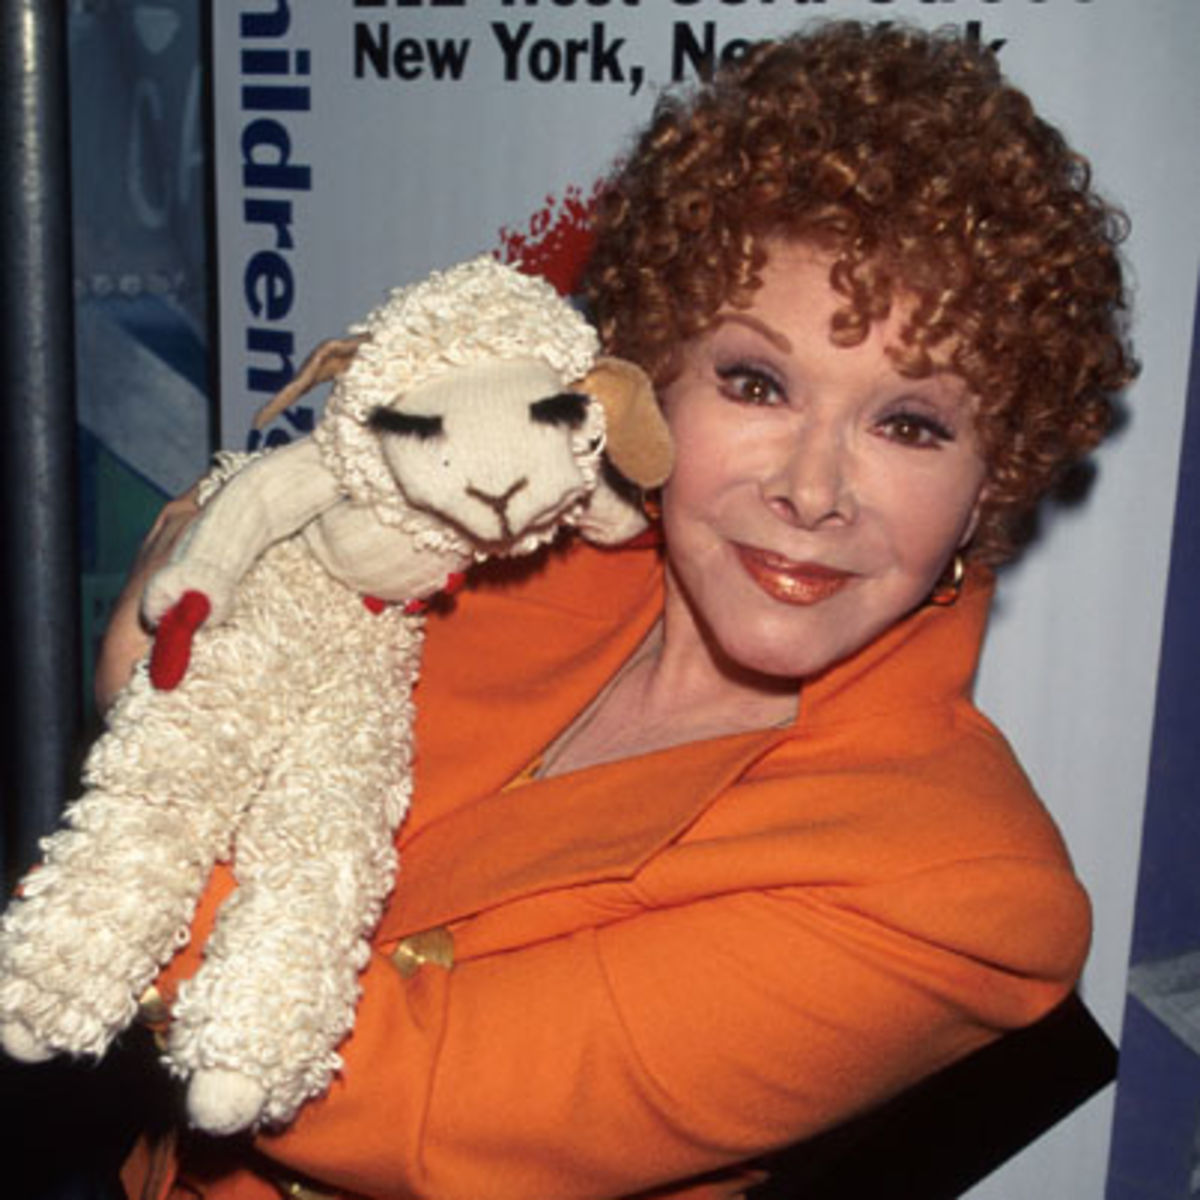 13 Fascinating Things You Probably Didn't Know About Shari Lewis And Lamb Chop